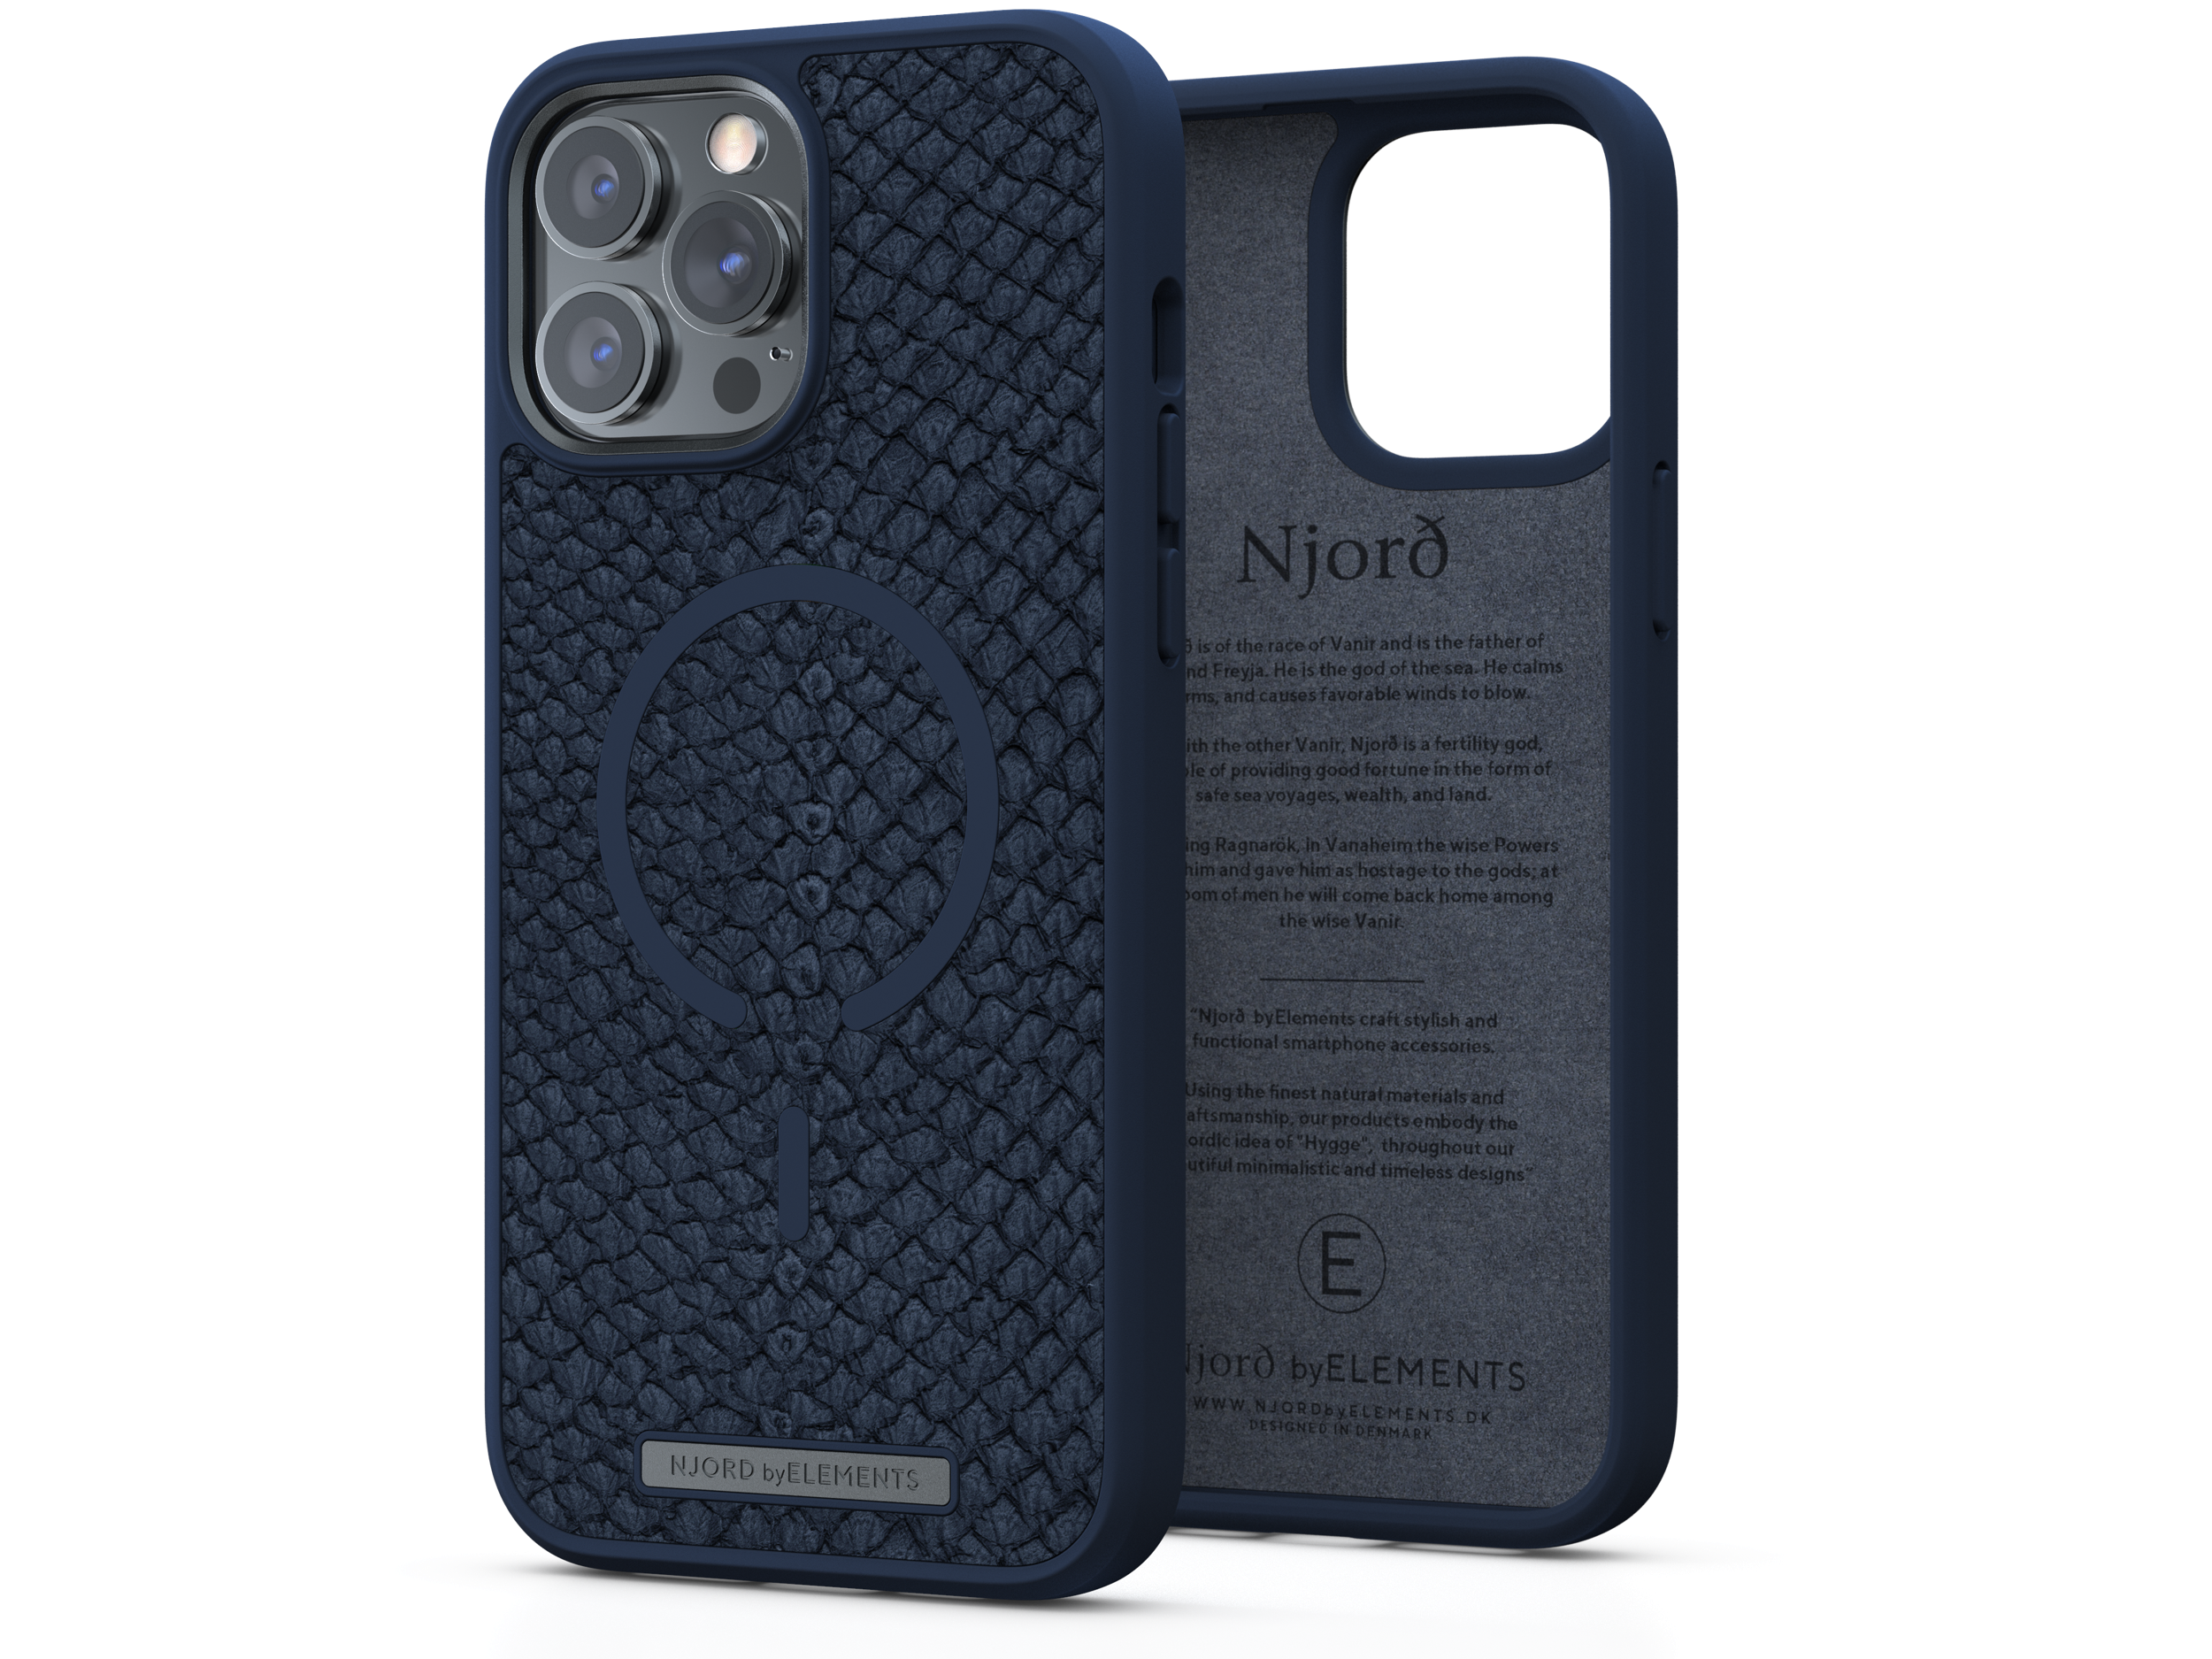 NJORD Njord, 13 Petrol Backcover, Apple, iPhone Max, Pro